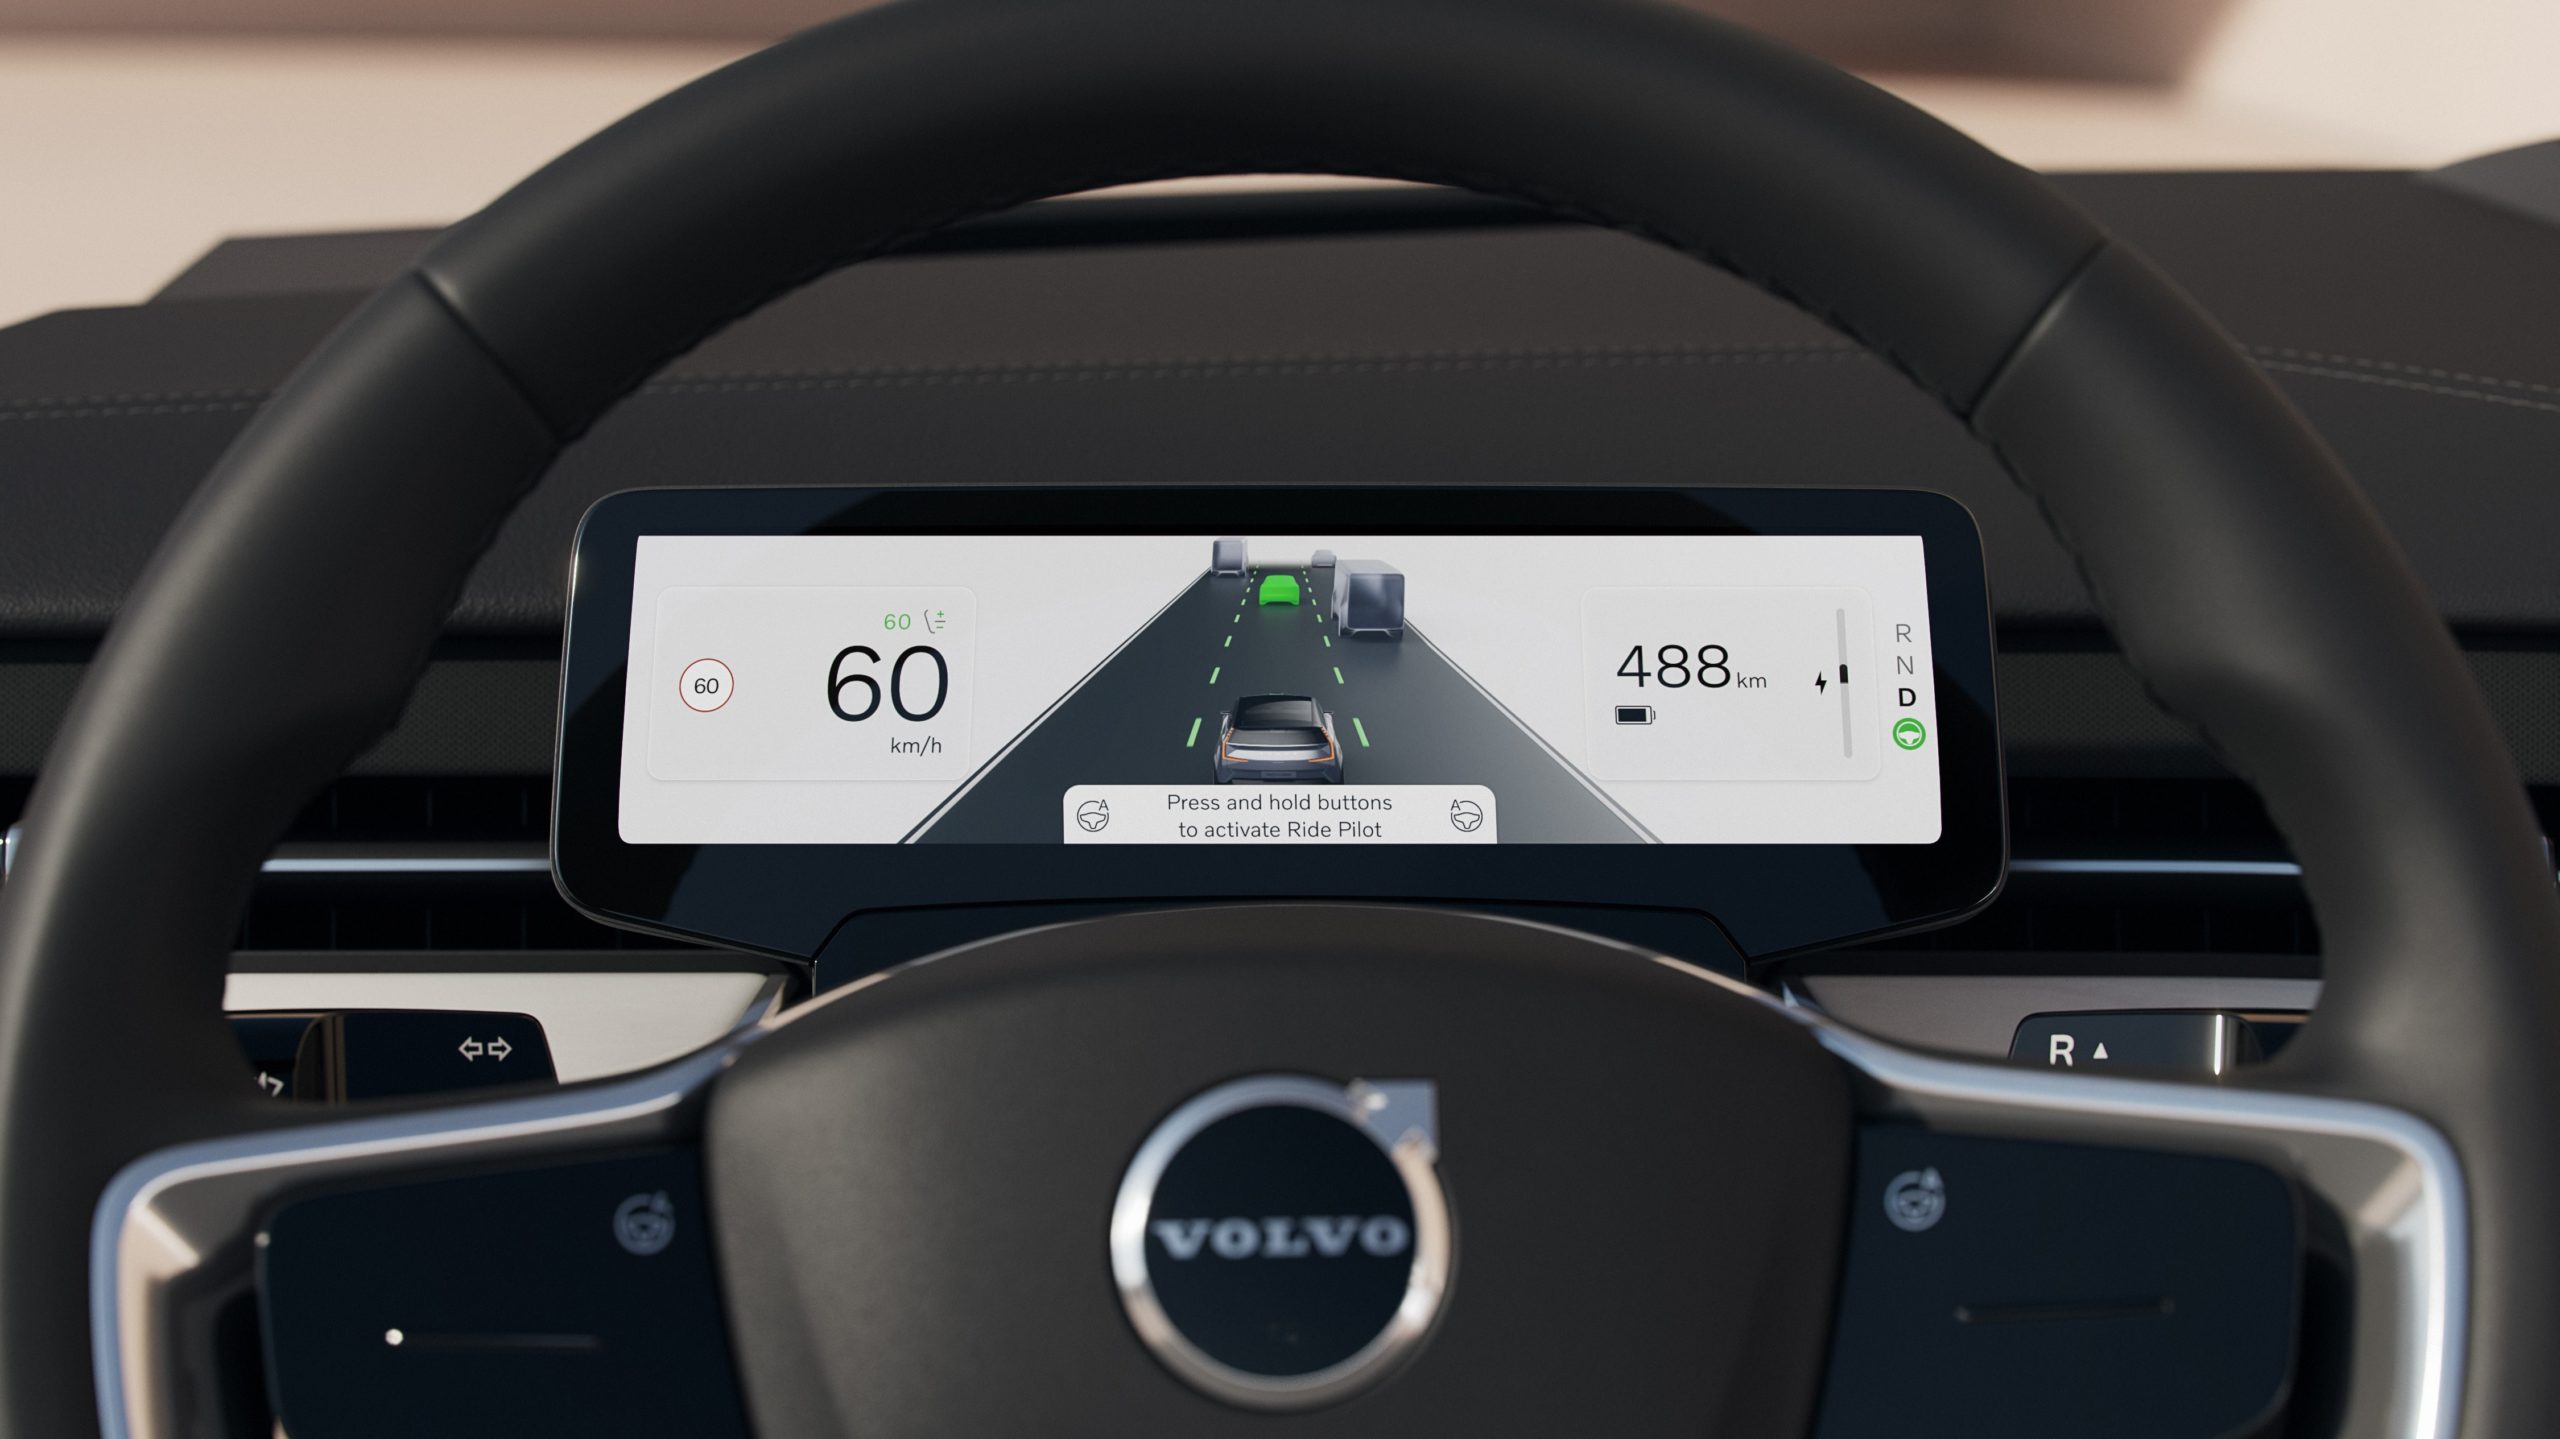 Infotainment system of the Volvo EX90